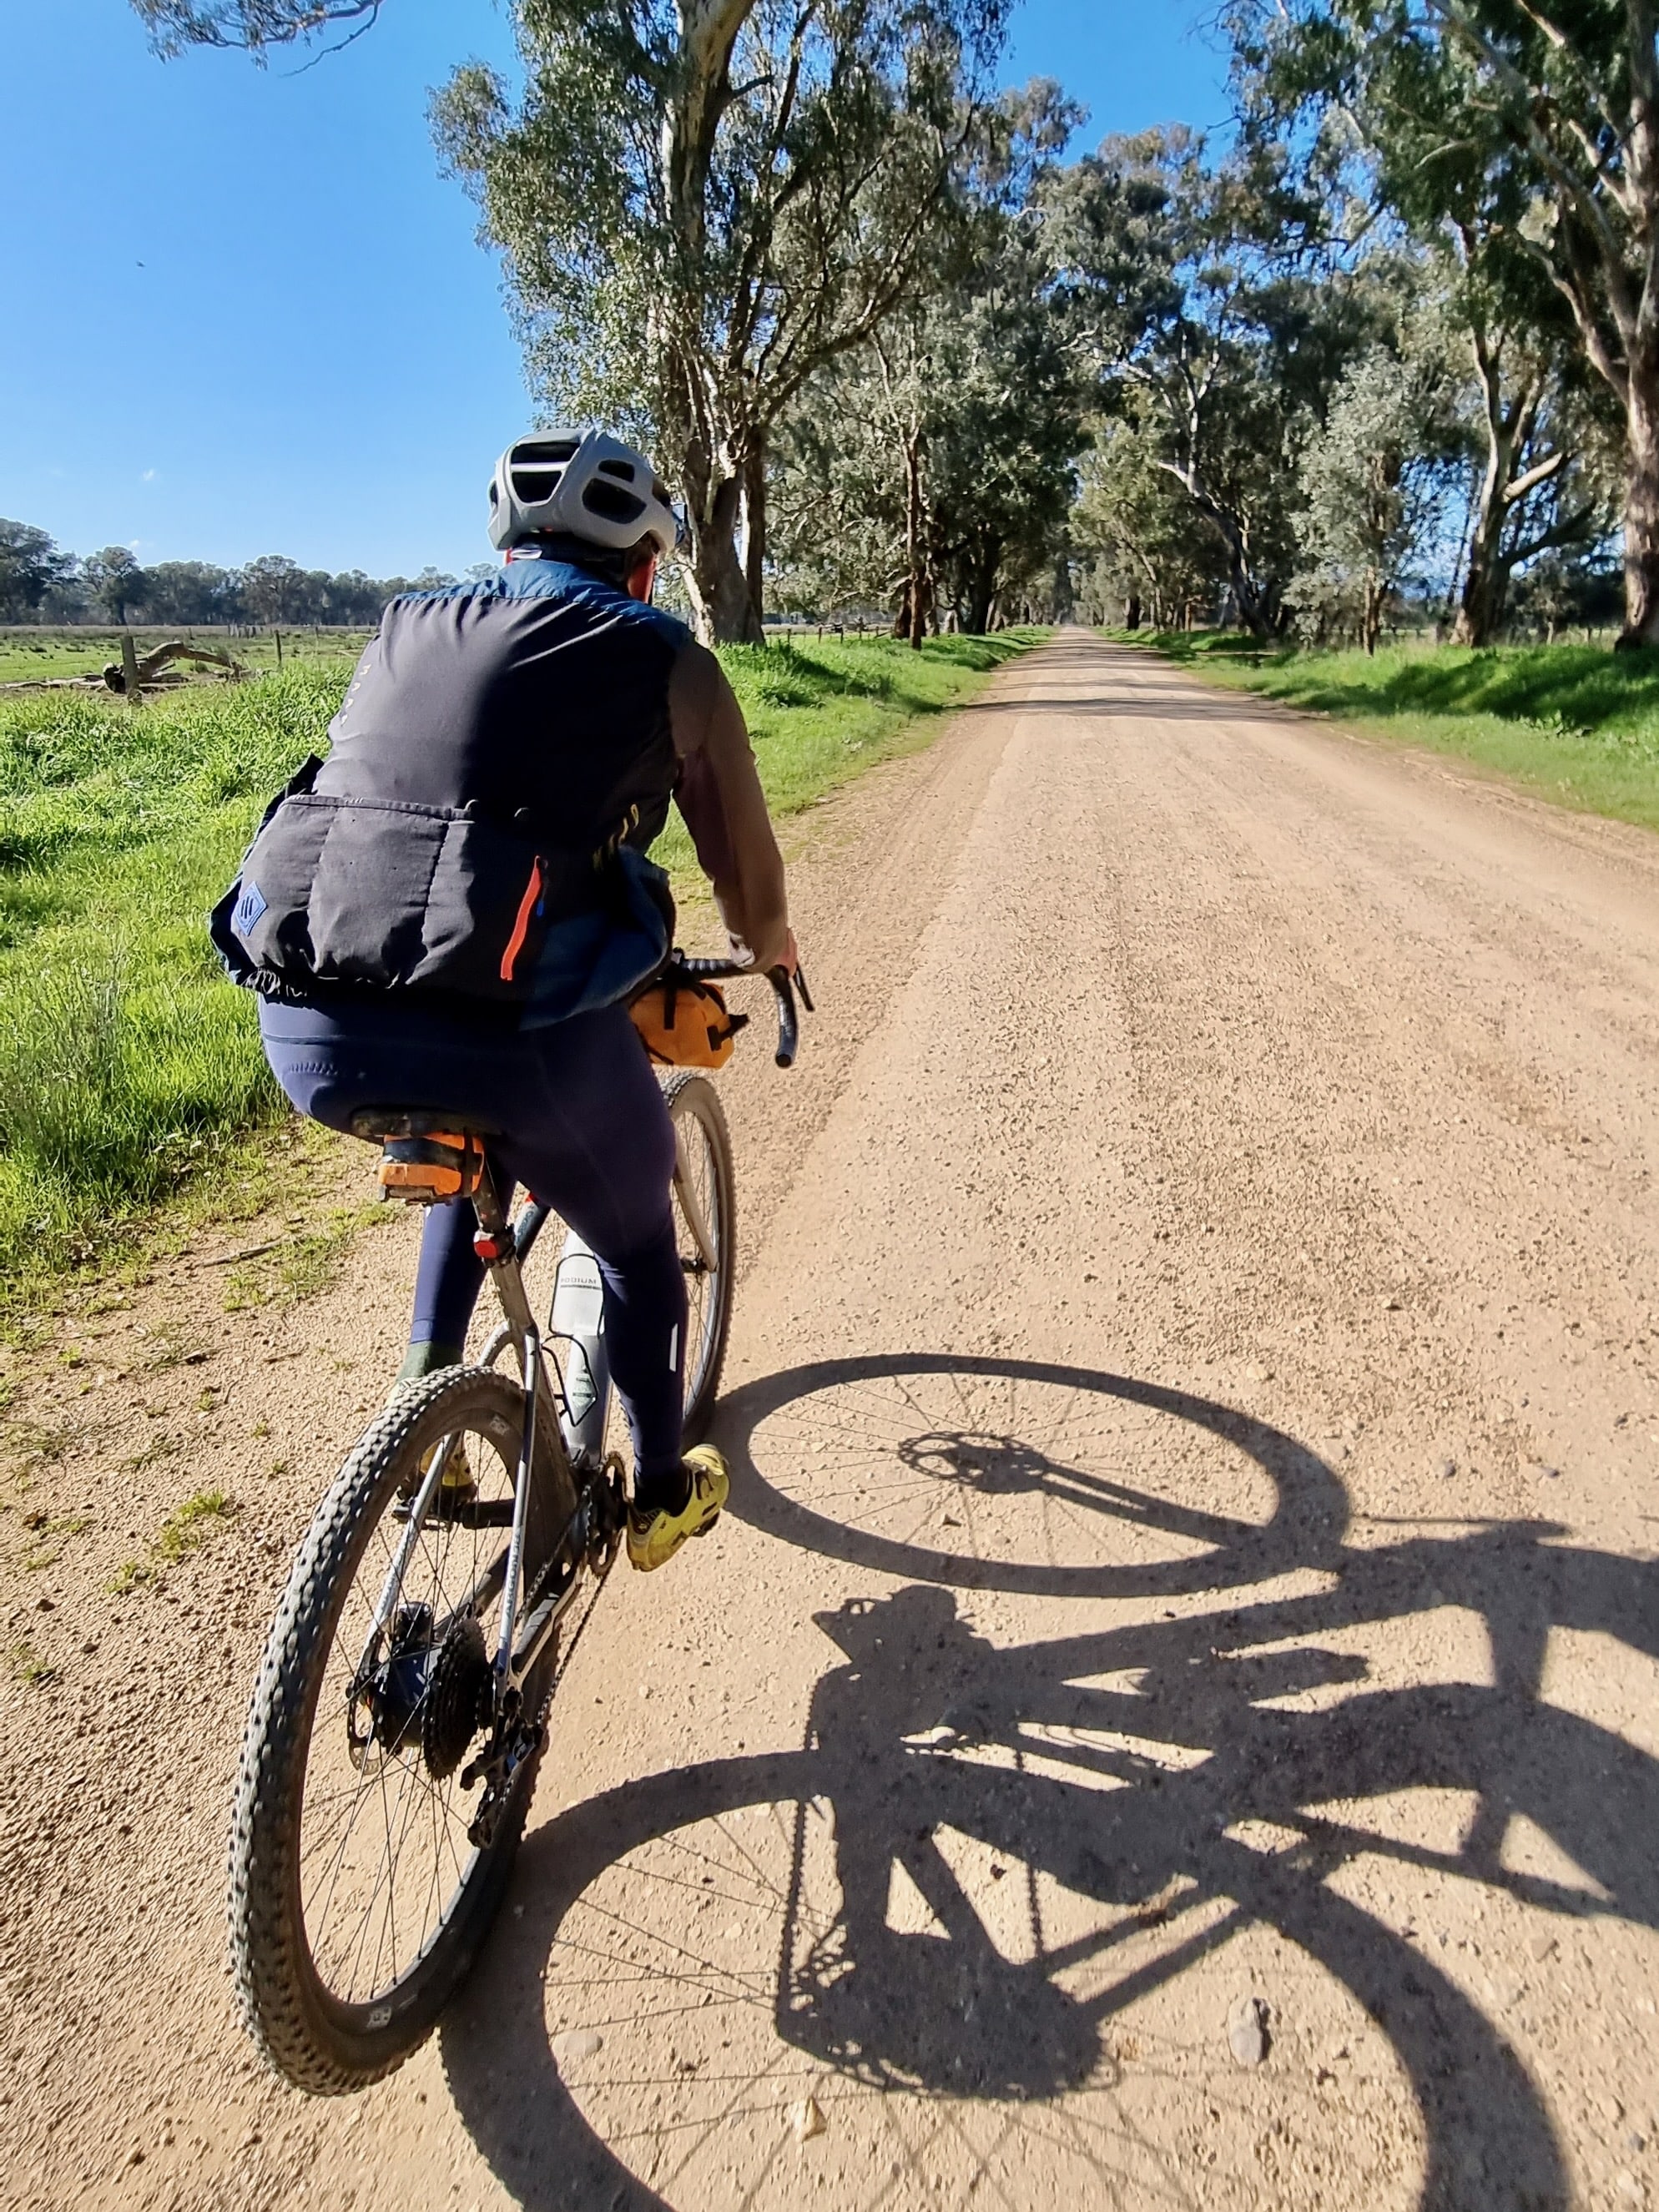 Gravel road treelined with native trees and cyclist riding a gravel bike on a sunny day